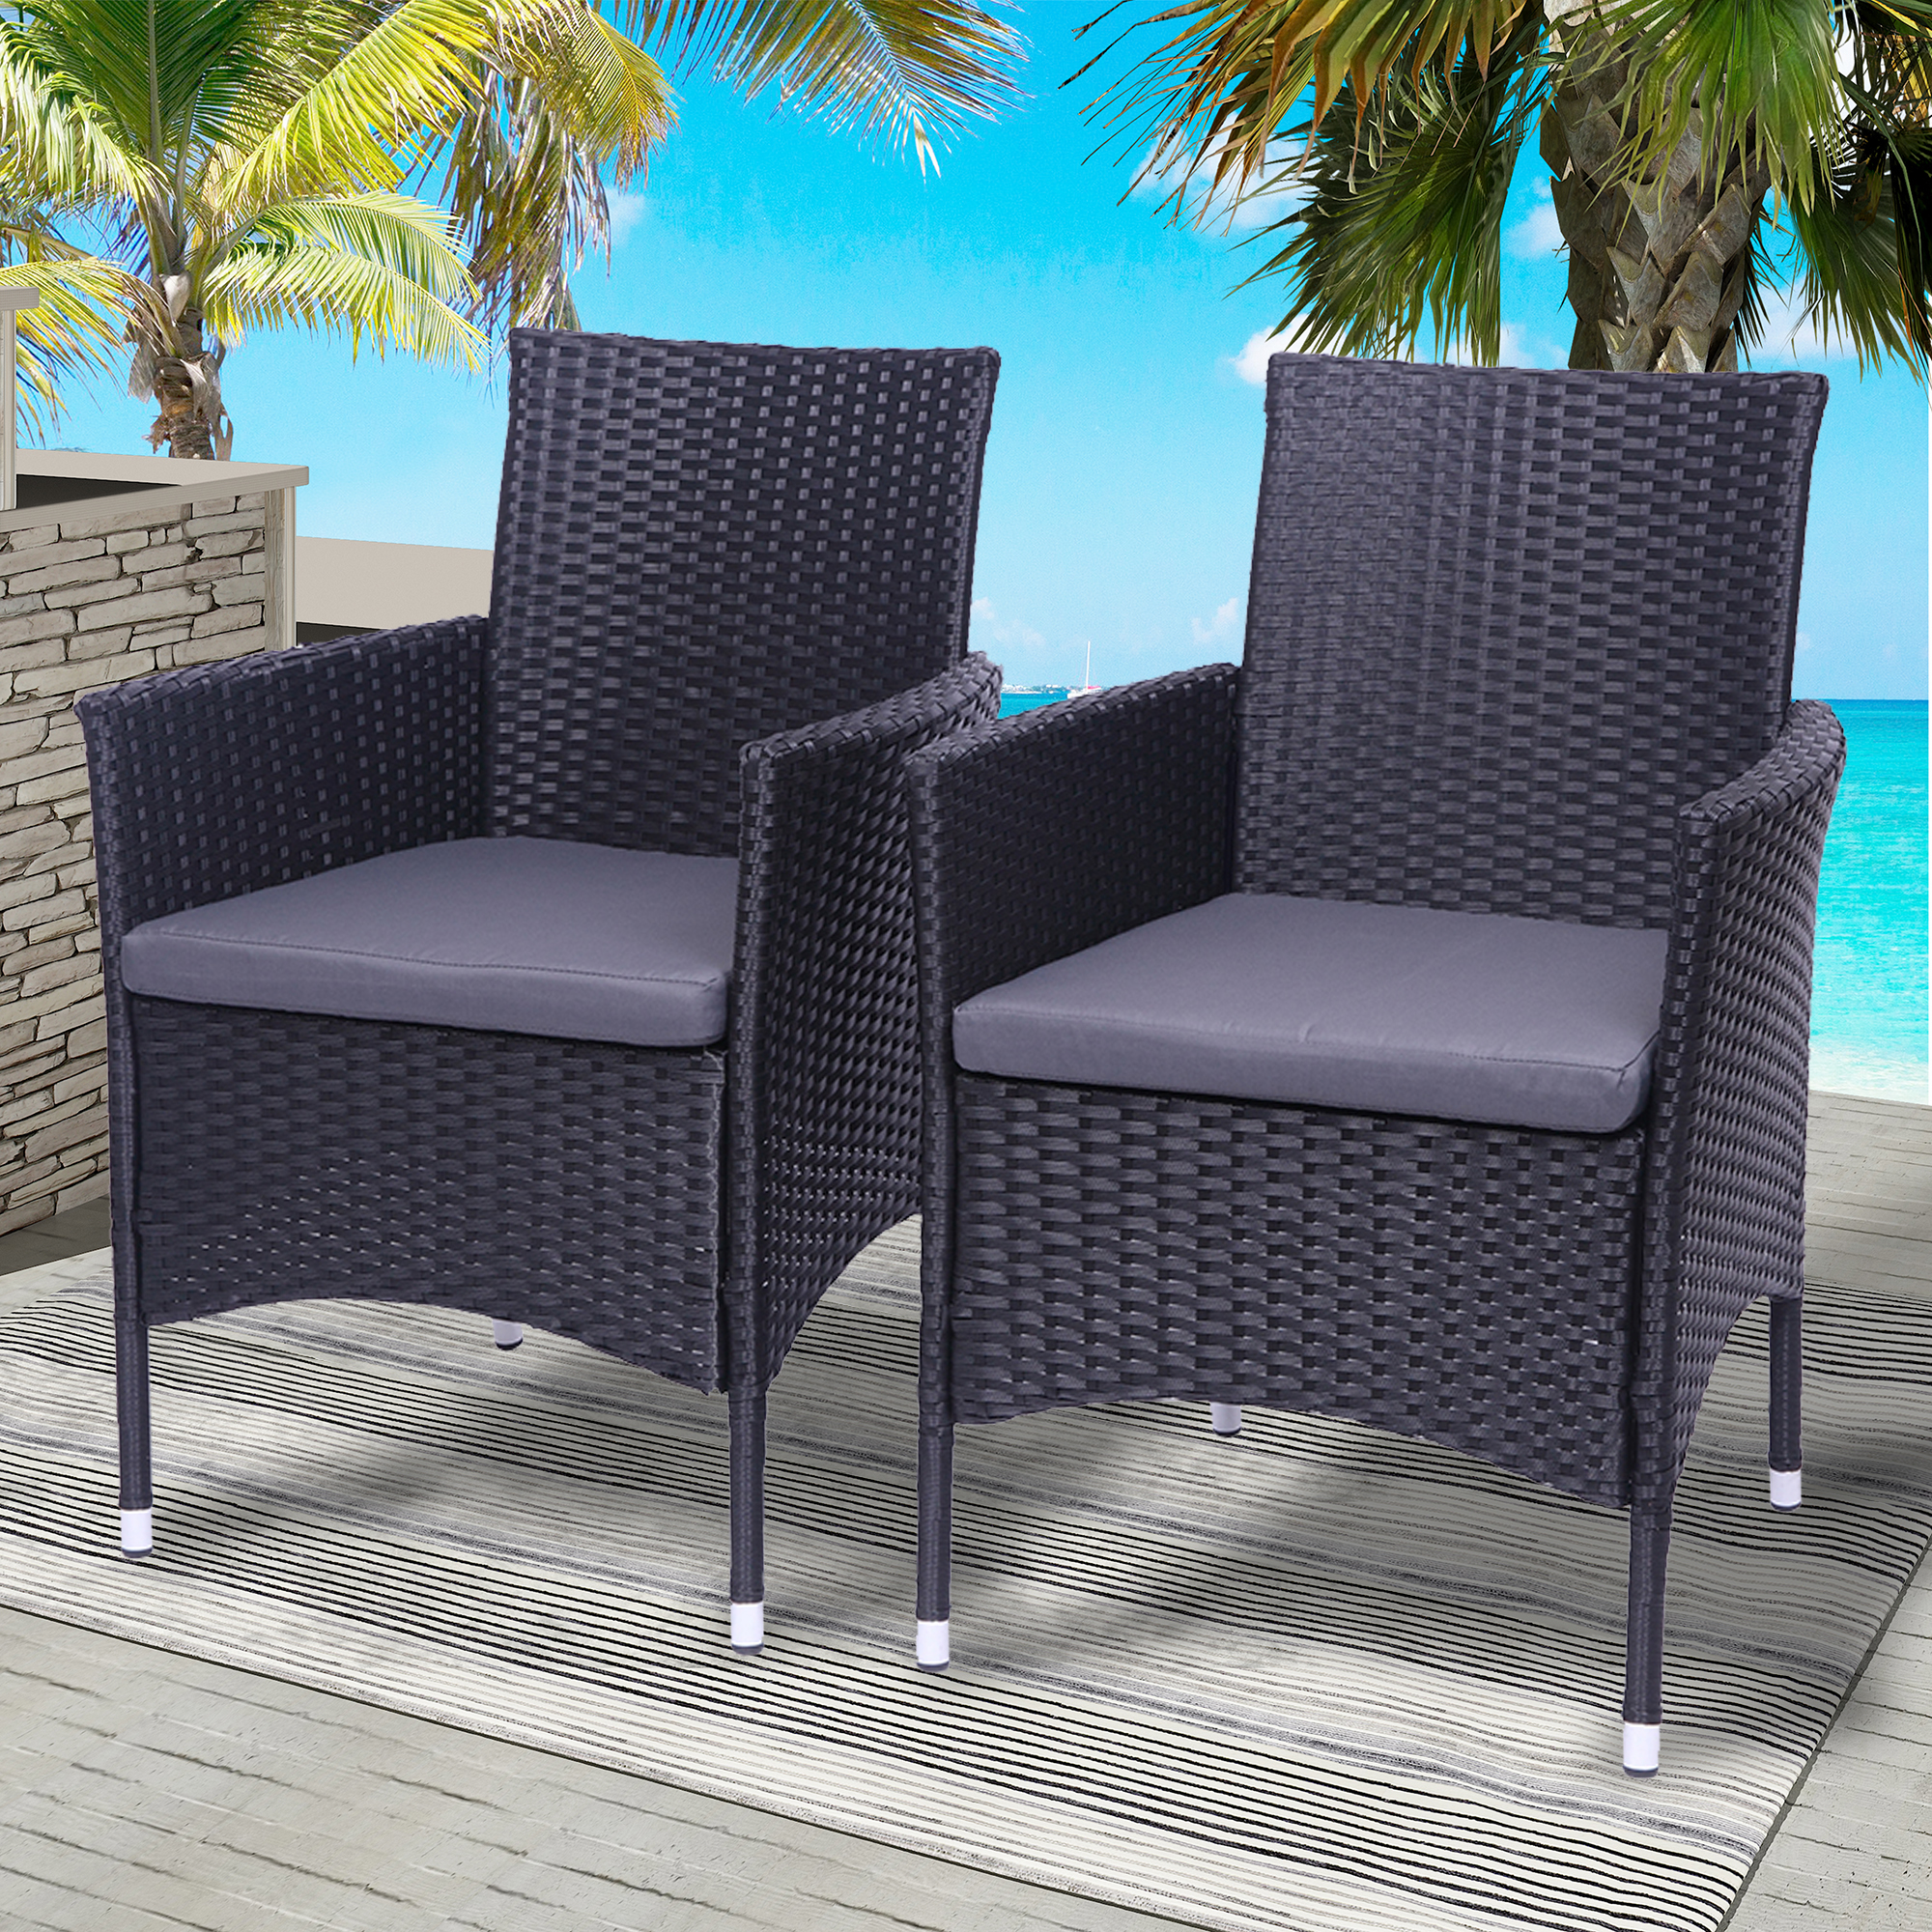 Patio Chairs Set of 2, BTMWAY All-Weather Wicker Patio Furniture Set, Heavy Duty Rattan Bistro Chairs Conversation Set, Front Porch Furniture Outdoor Chairs Set for Backyard Garden Balcony, Black - image 1 of 11